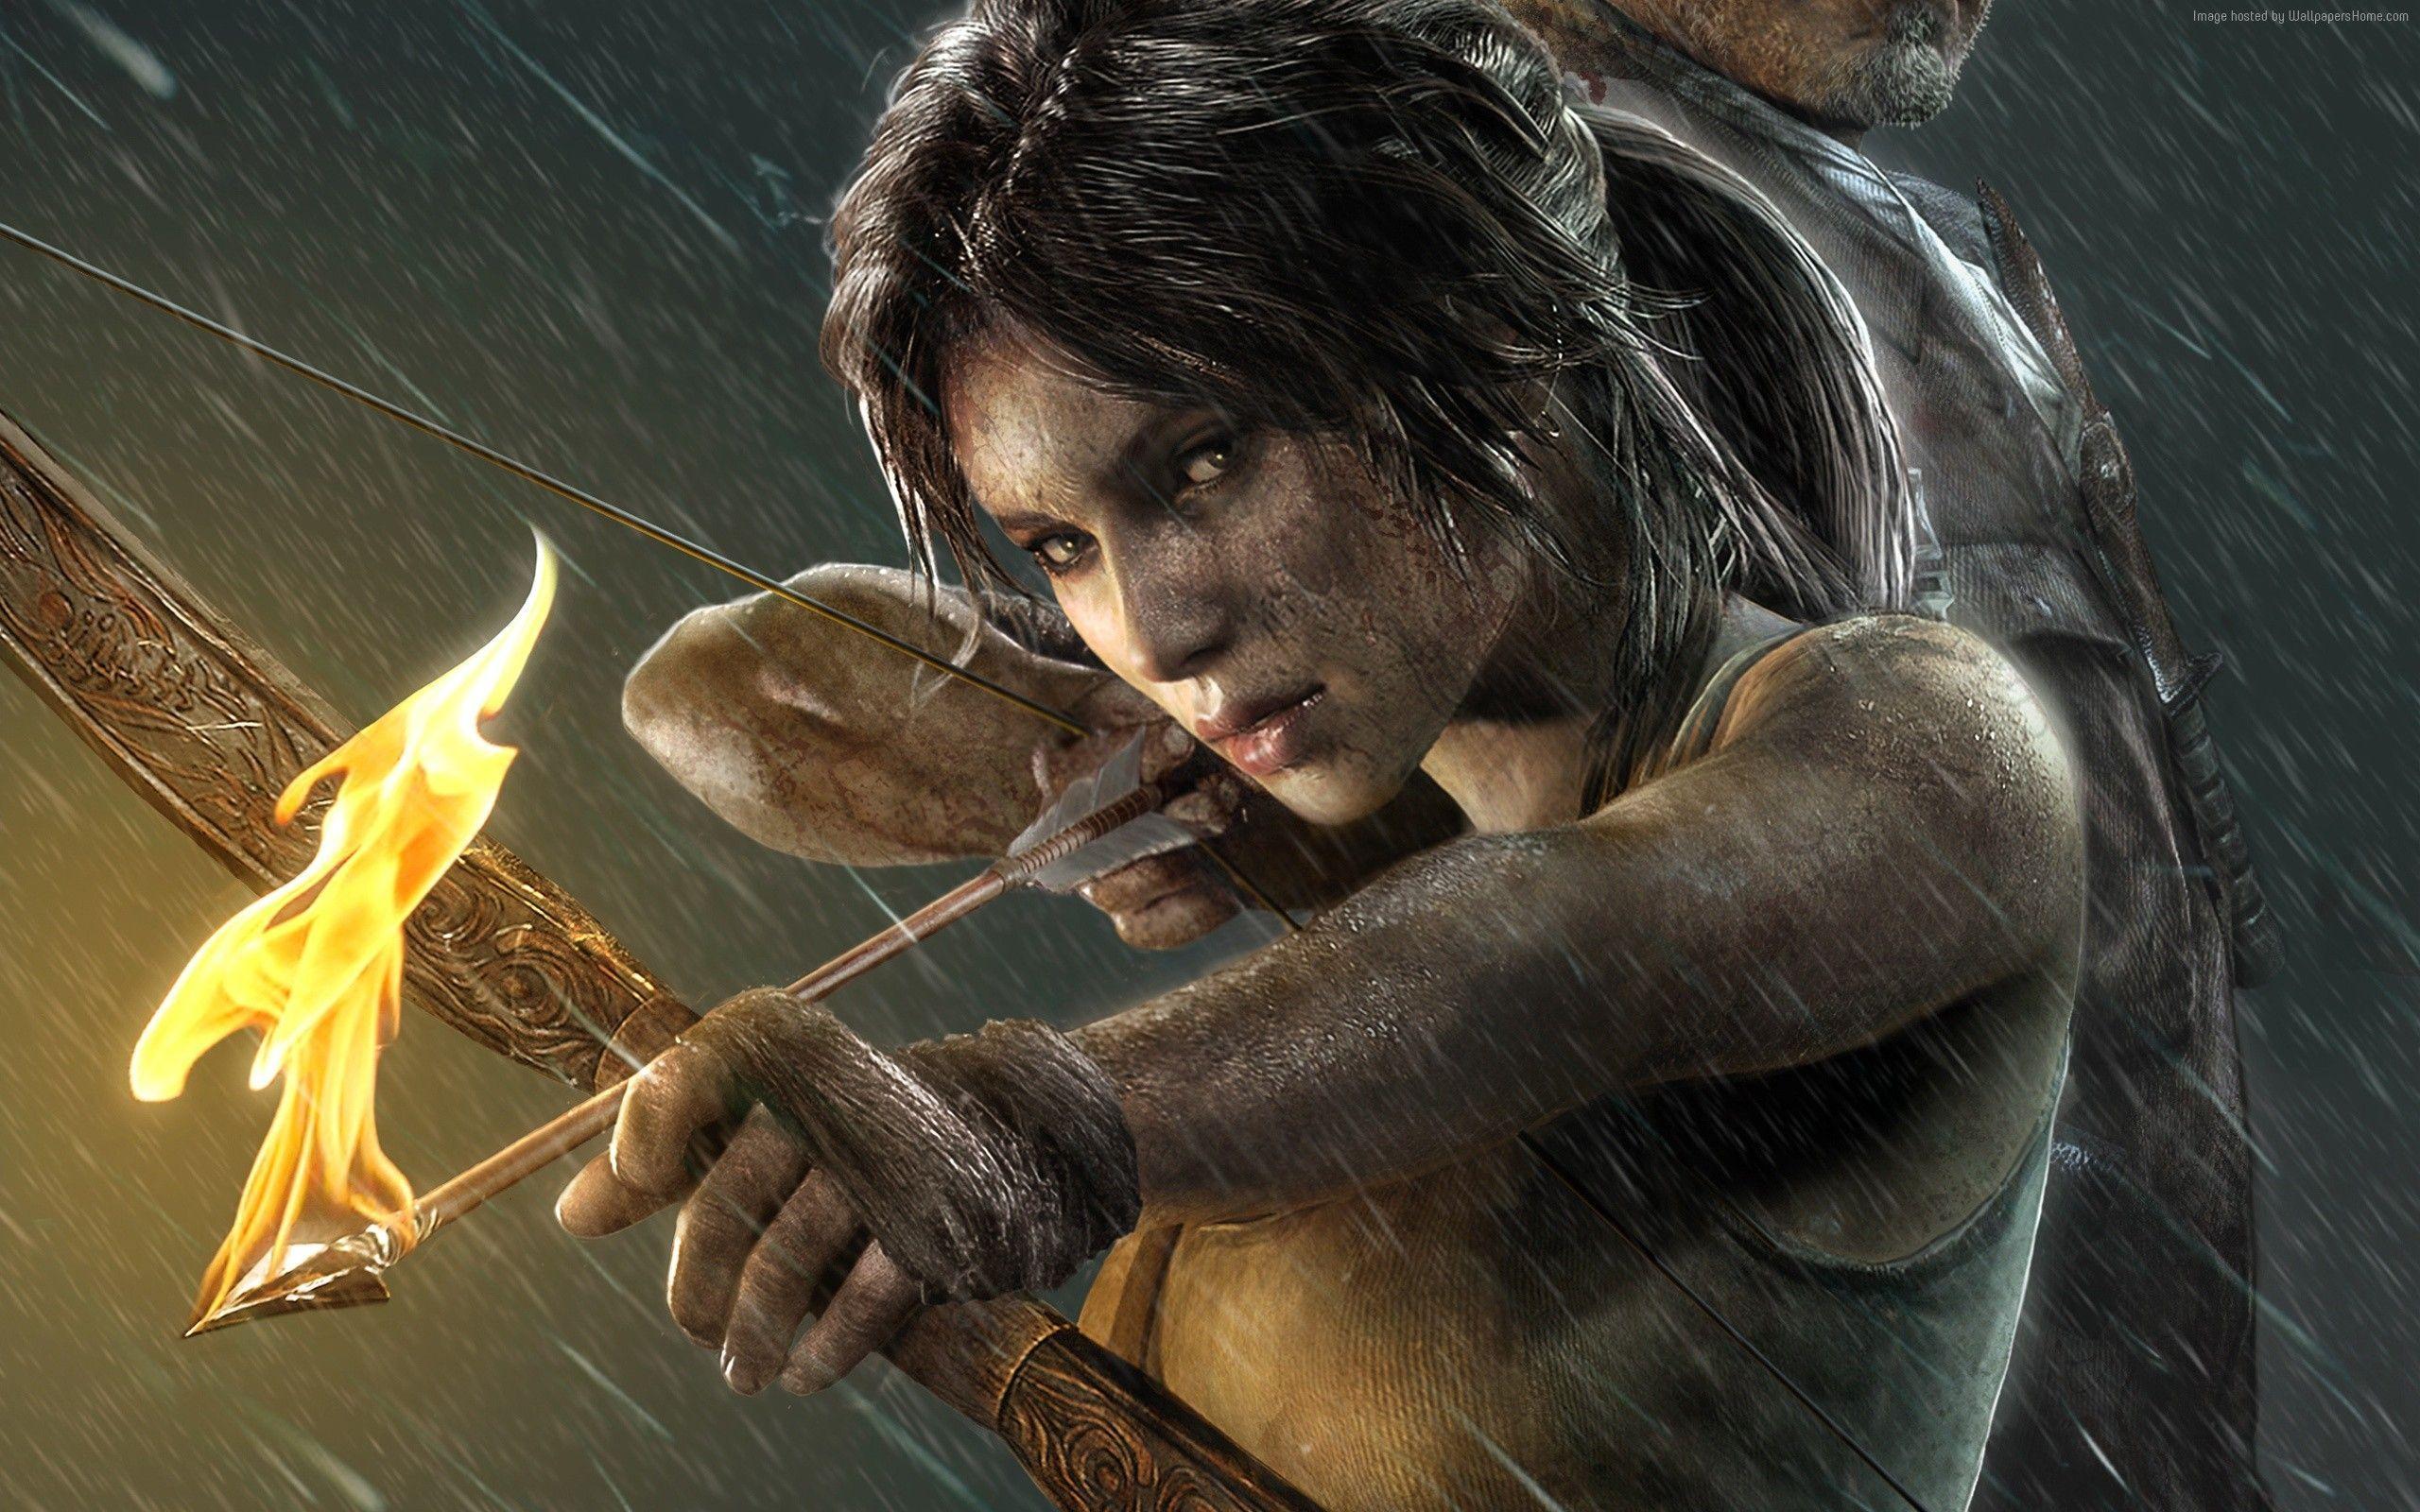 Rise of the Tomb Raider Wallpaper, Art / Our Choice: Rise of the